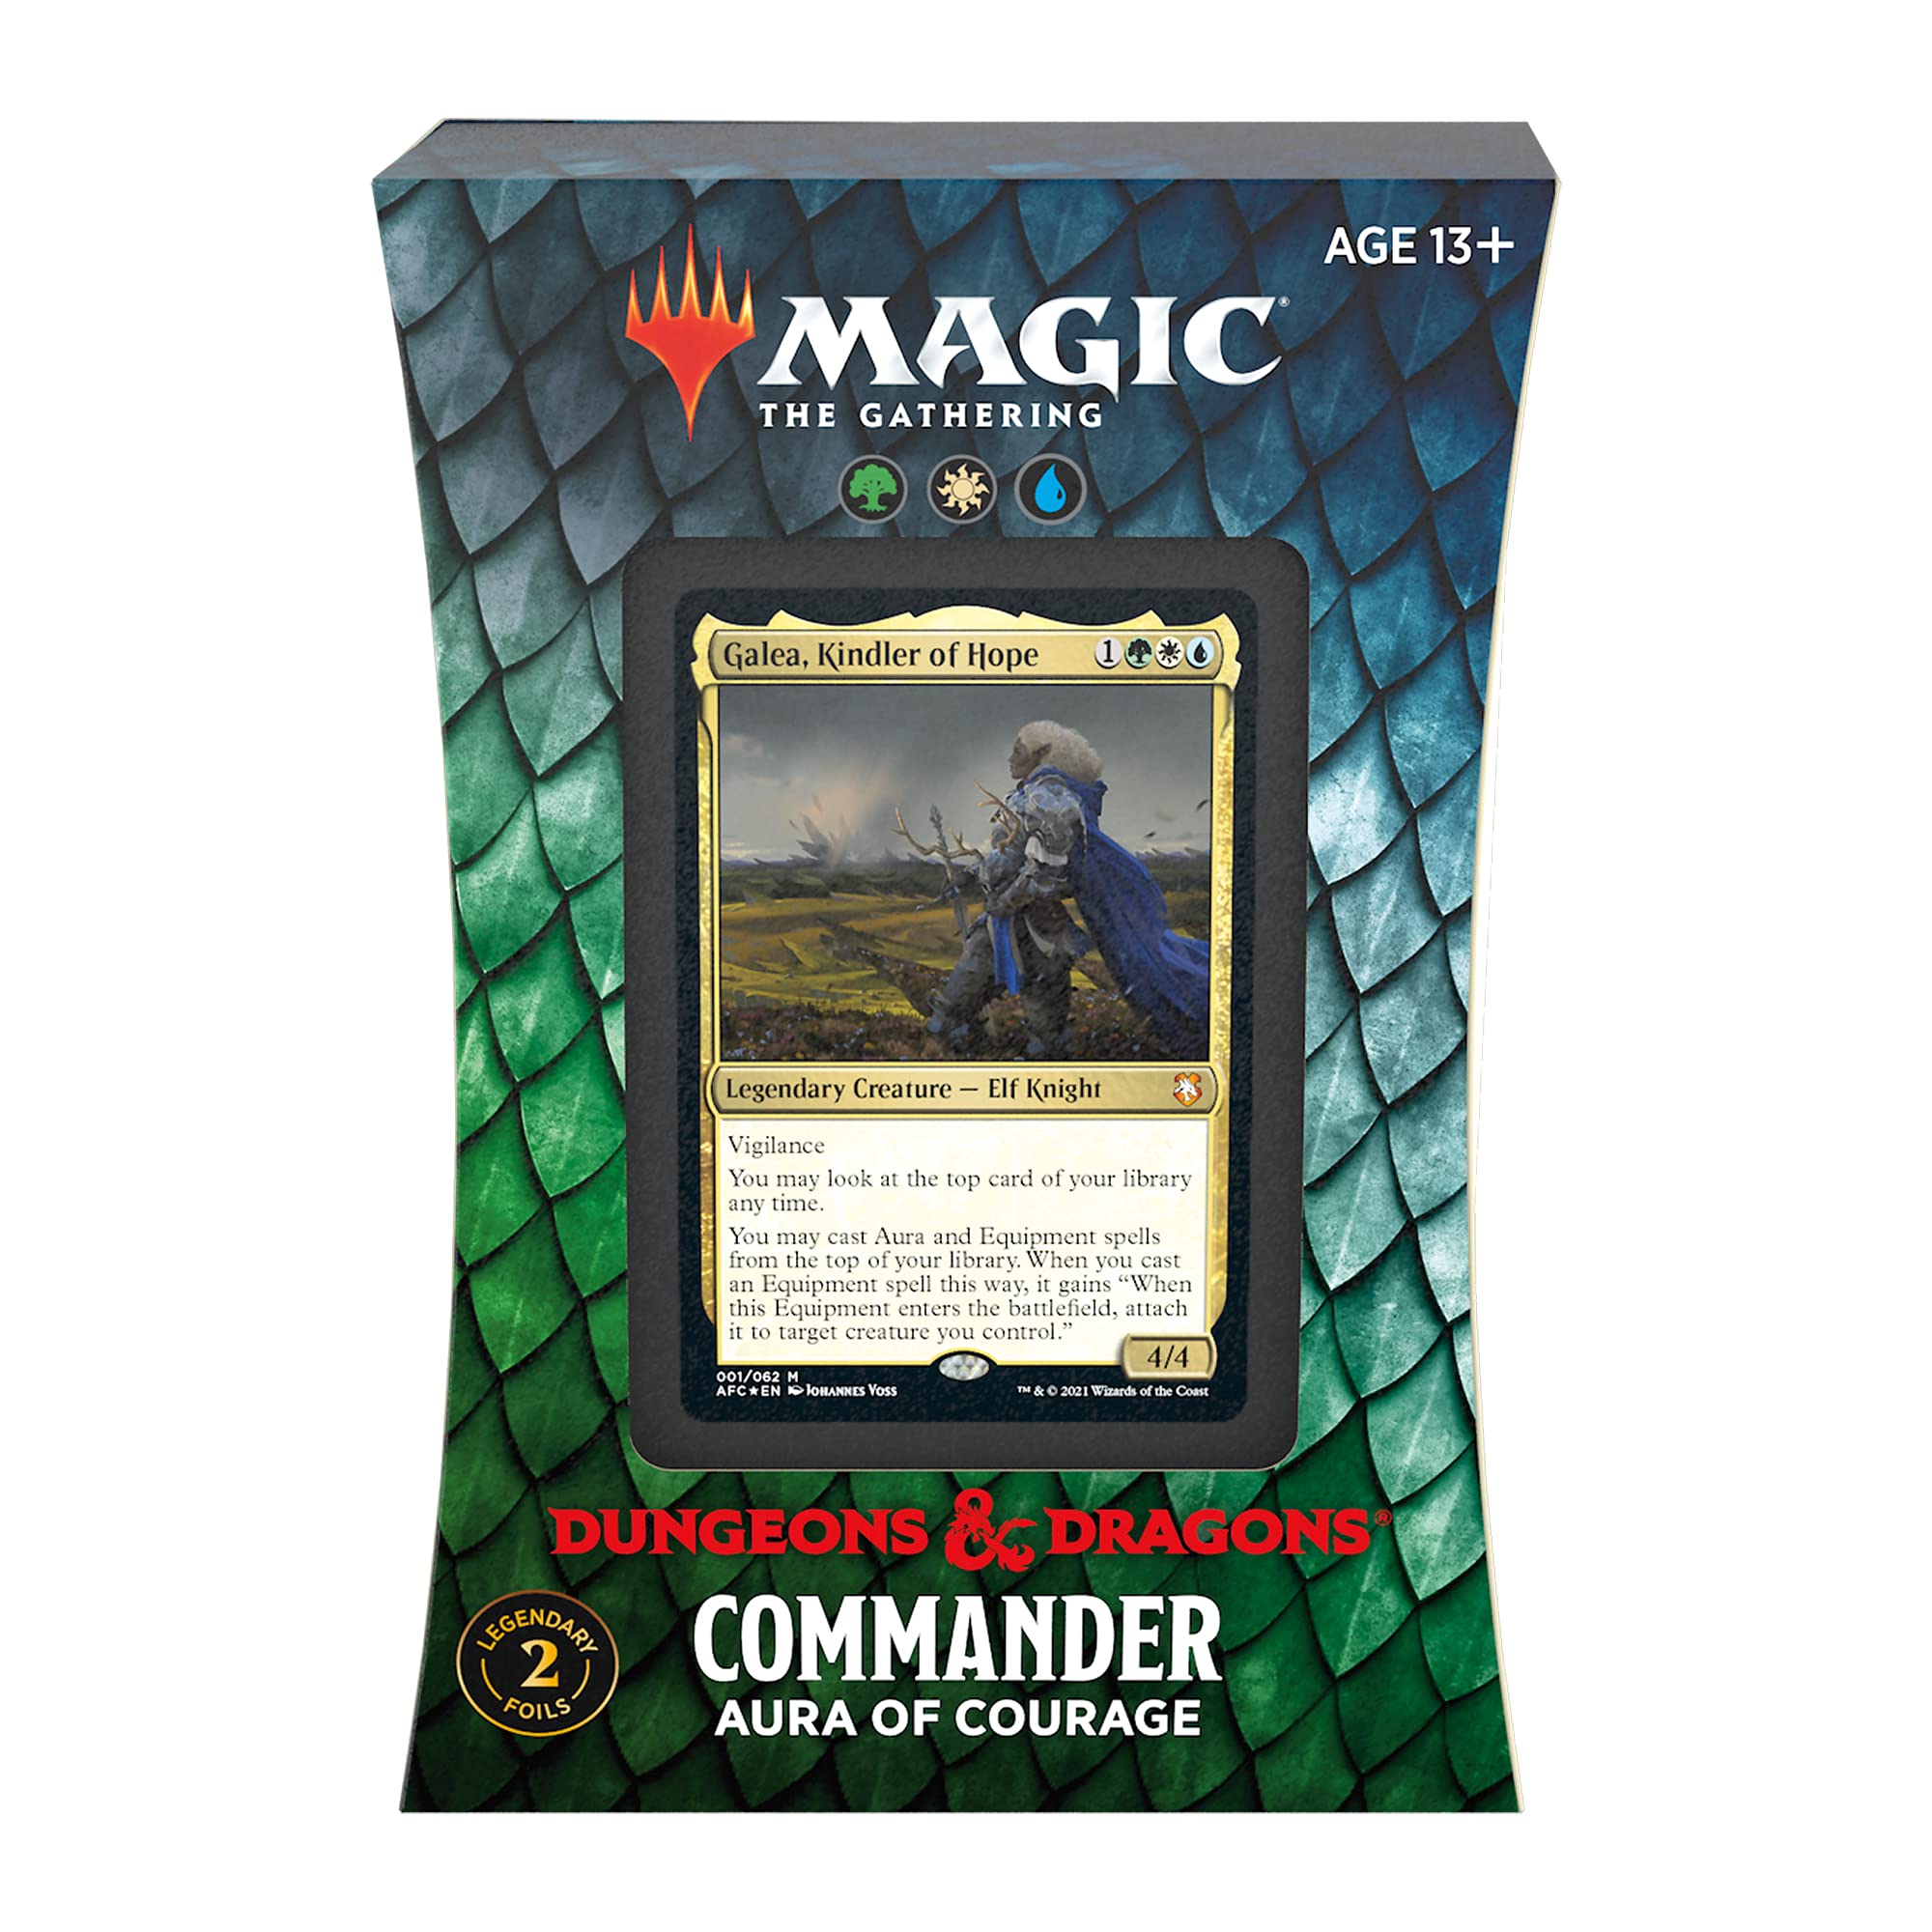 Magic: The Gathering Adventures in the Forgotten Realms Commander Deck Bundle – Includes 1 Draconic Rage + 1 Planar Portal + 1 Dungeons of Death + 1 Aura of Courage